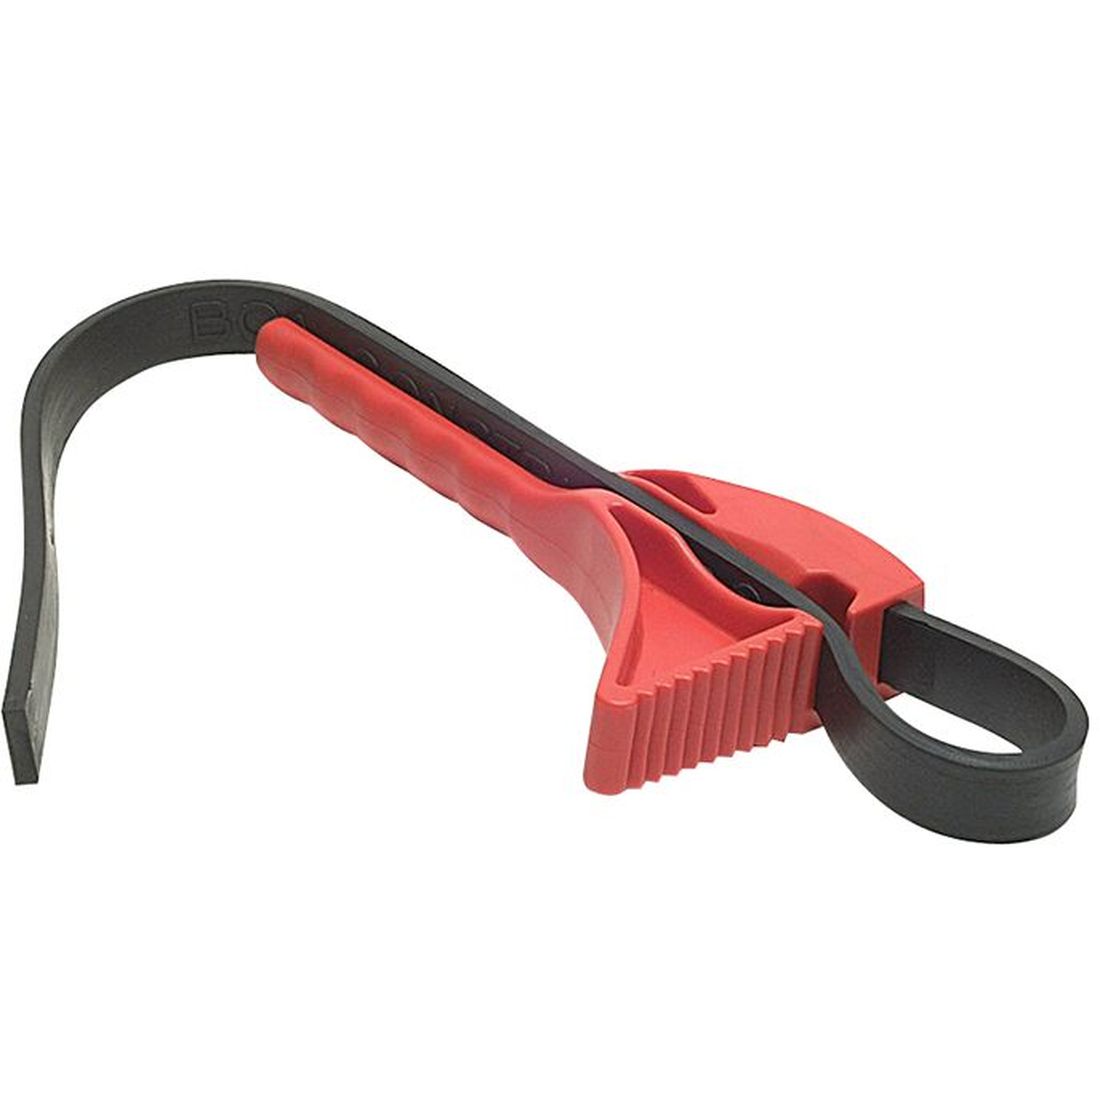 BOA Constrictor Strap Wrench 10-160mm 